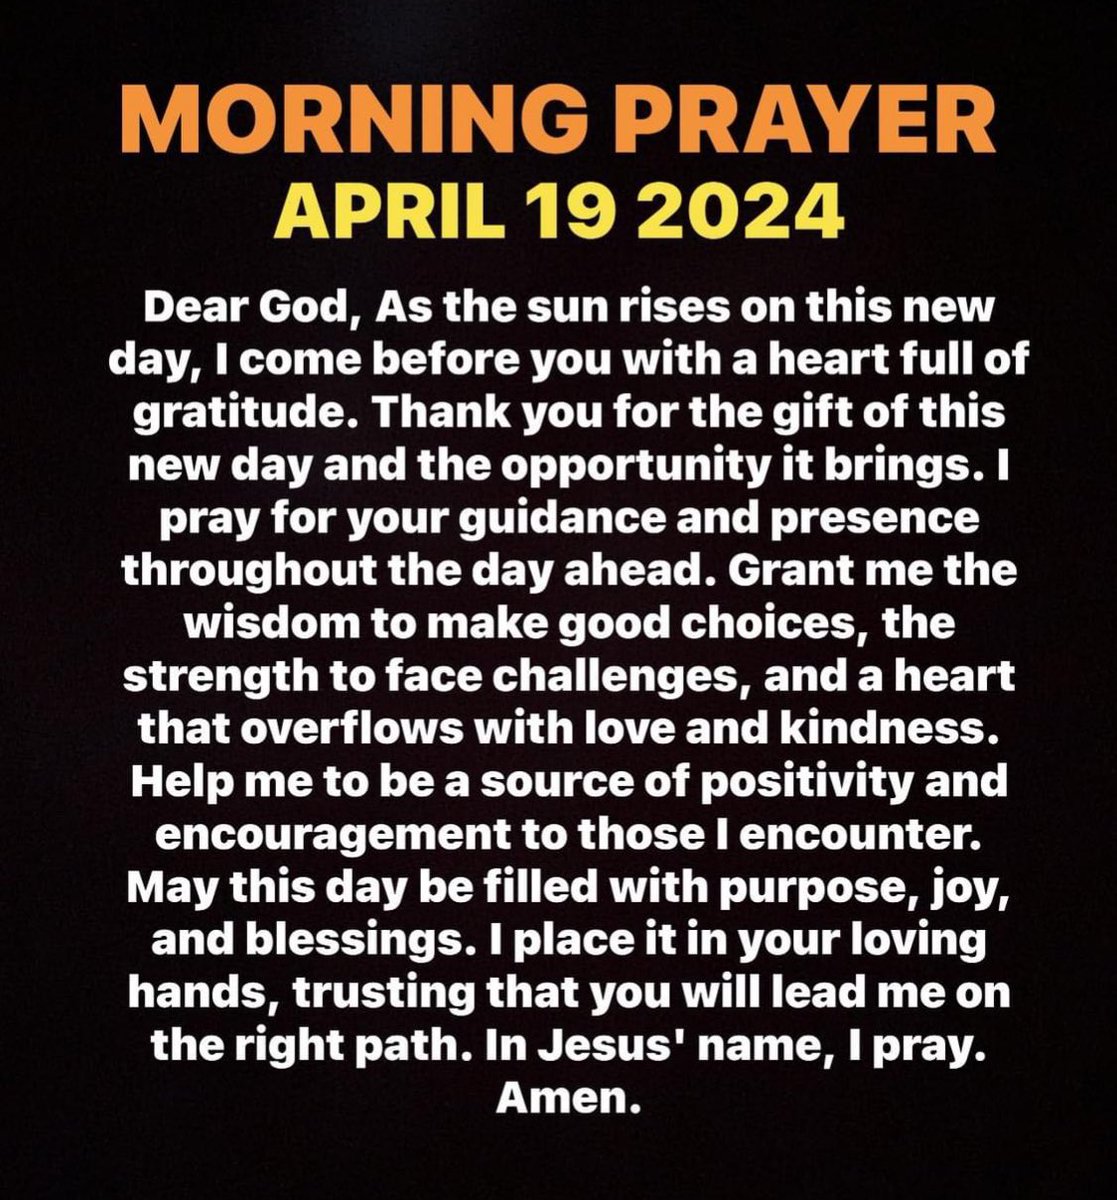 Good morning ☀️ Shall we pray? In Jesus name…Amen 🙏 Hope you have safe and blessed day ✝️🇺🇸